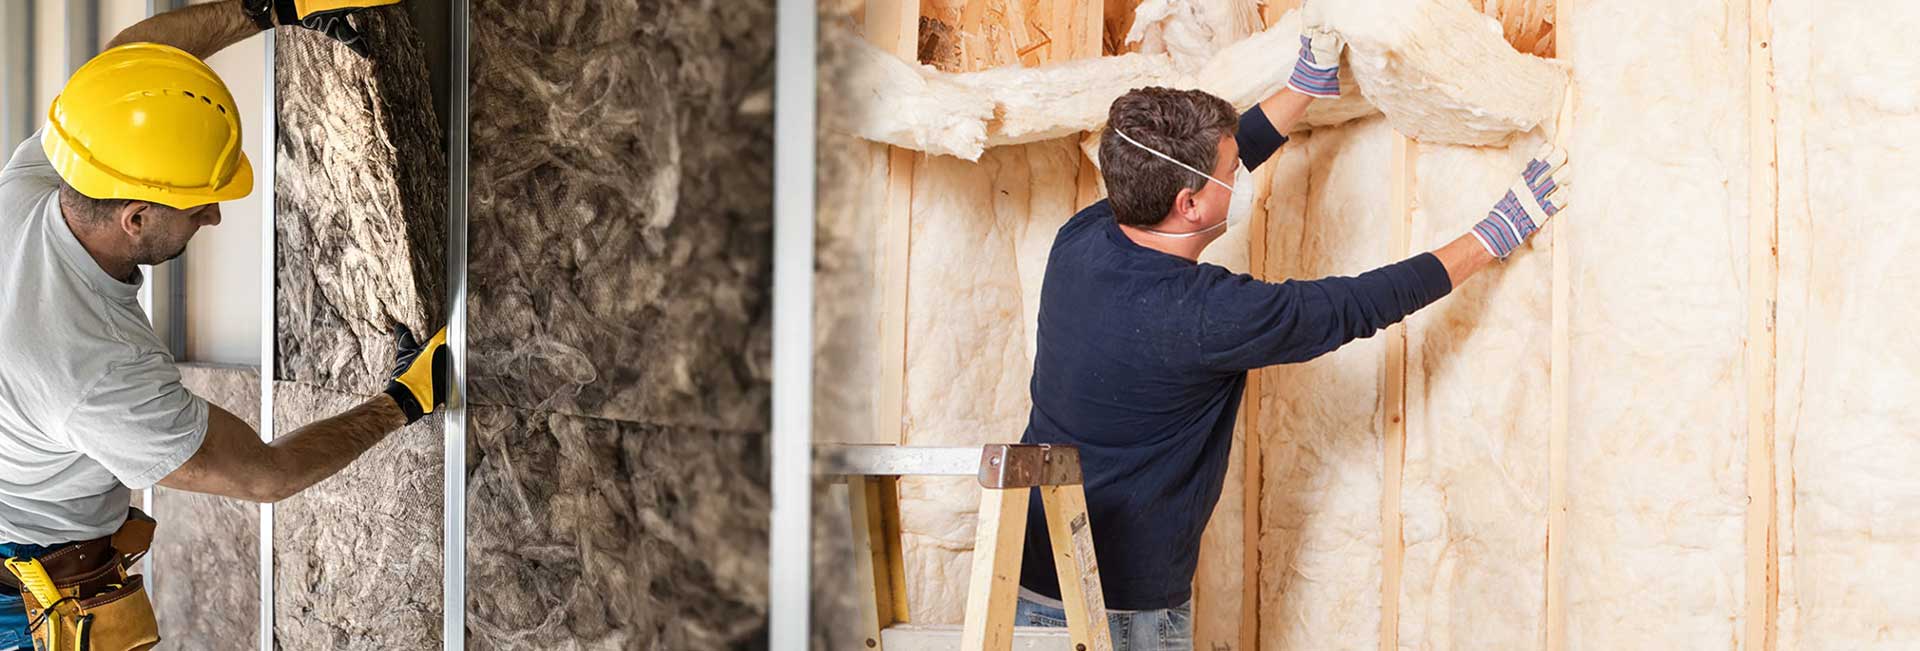 Hiring Professional Contractors for High-Quality Soundproofing Services in Seattle